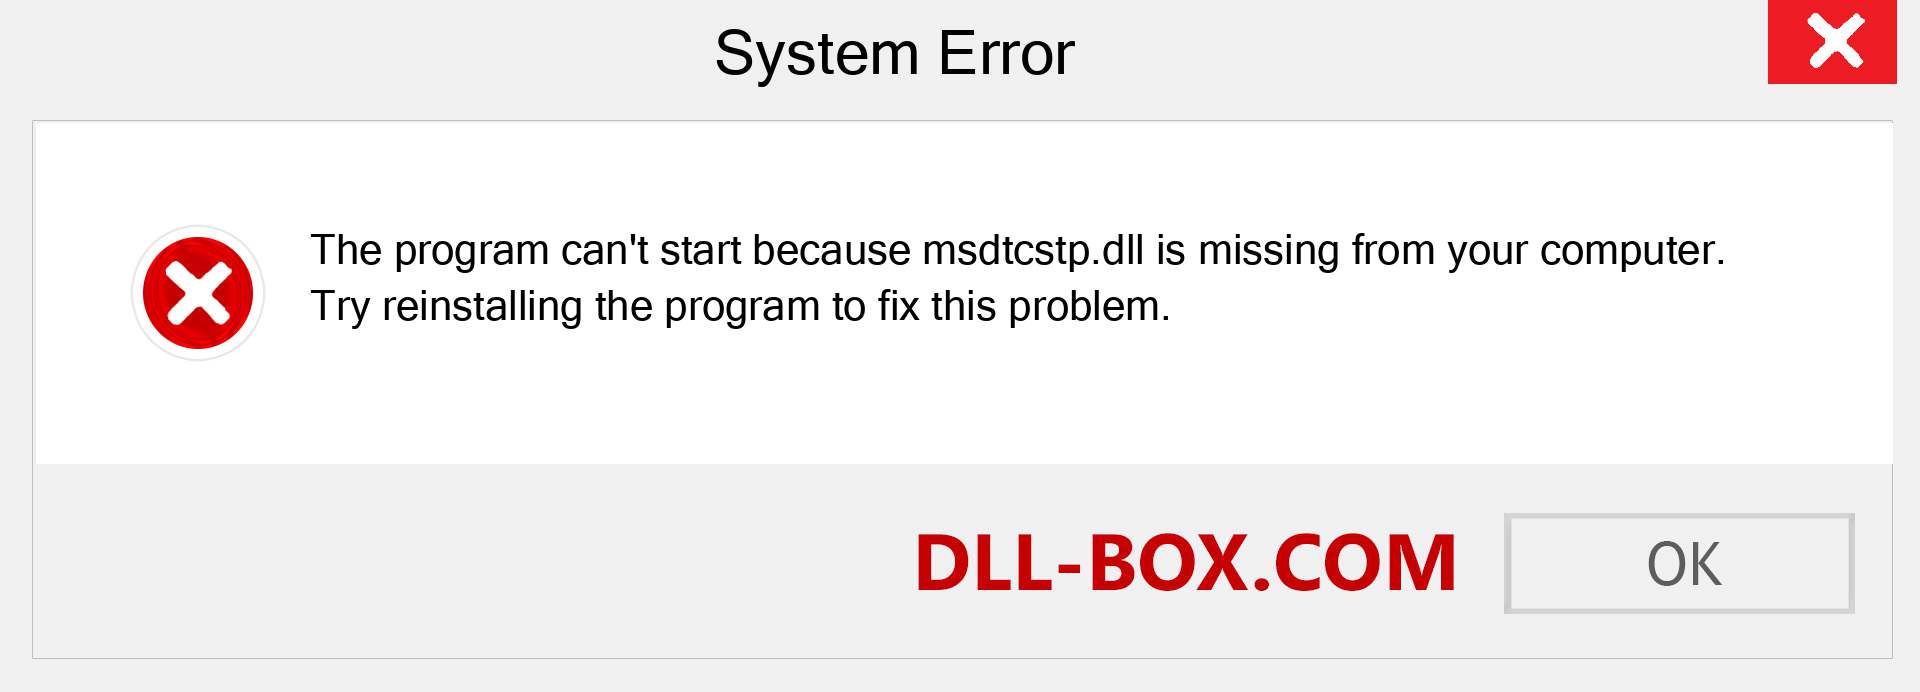  msdtcstp.dll file is missing?. Download for Windows 7, 8, 10 - Fix  msdtcstp dll Missing Error on Windows, photos, images